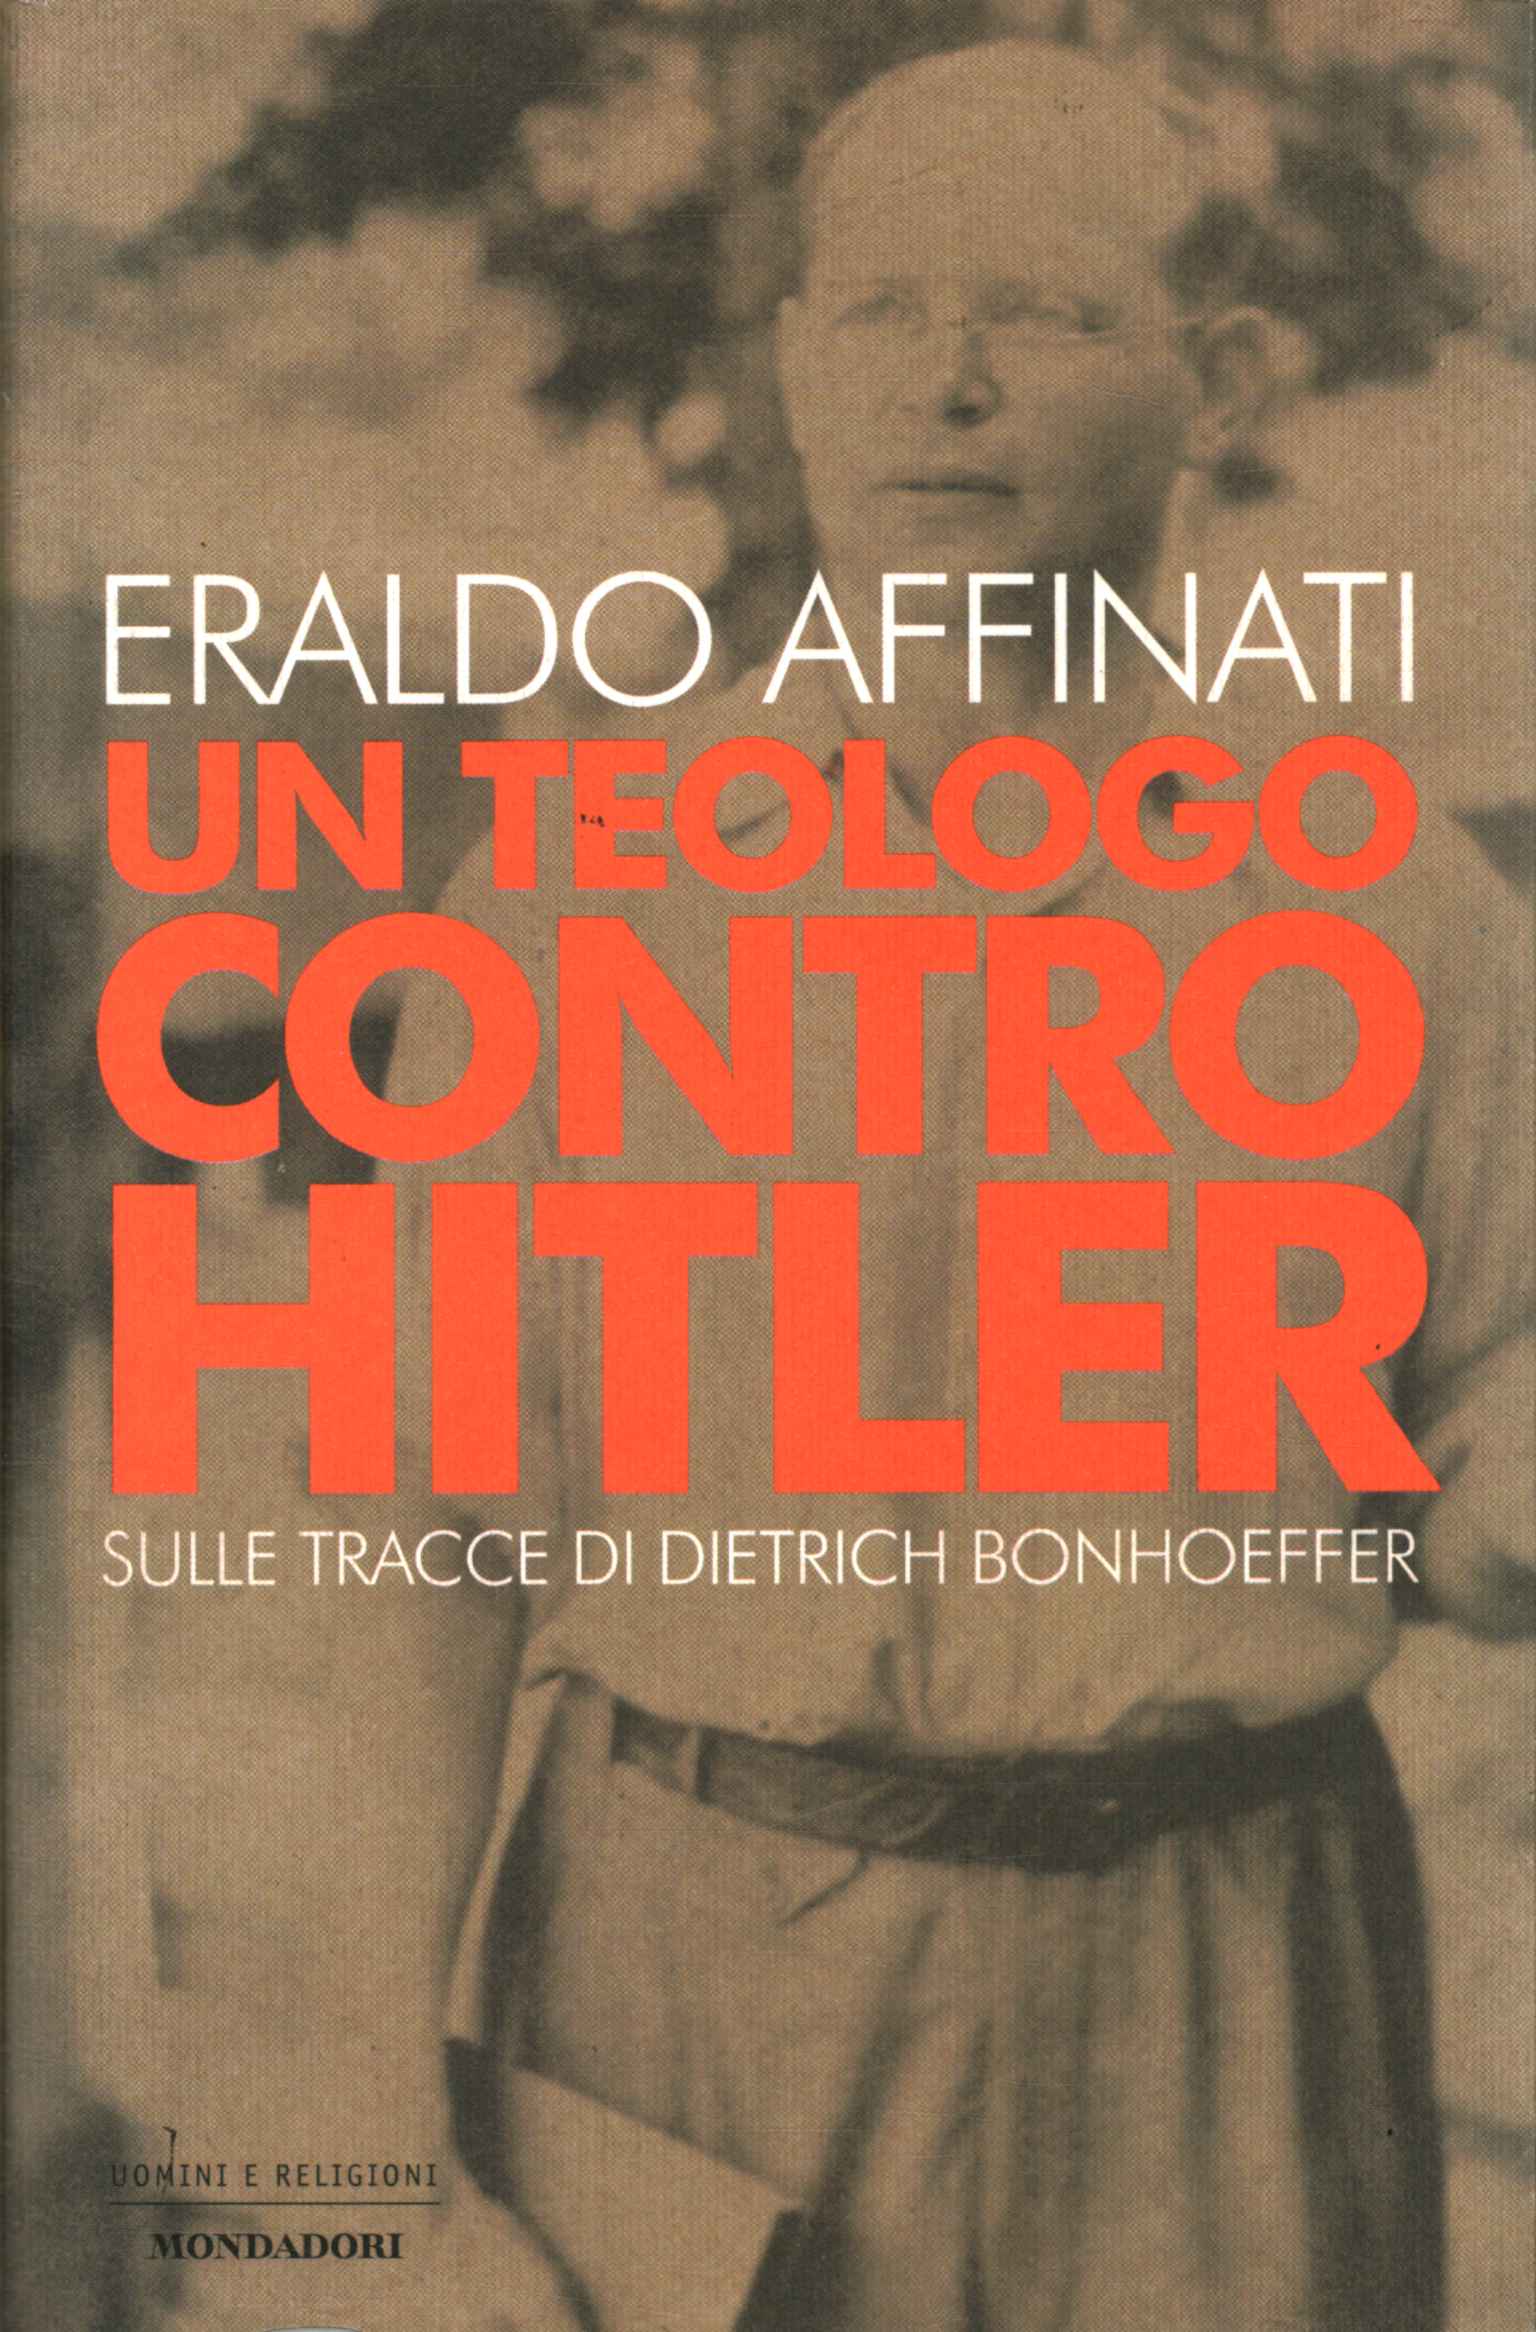 A theologian against Hitler